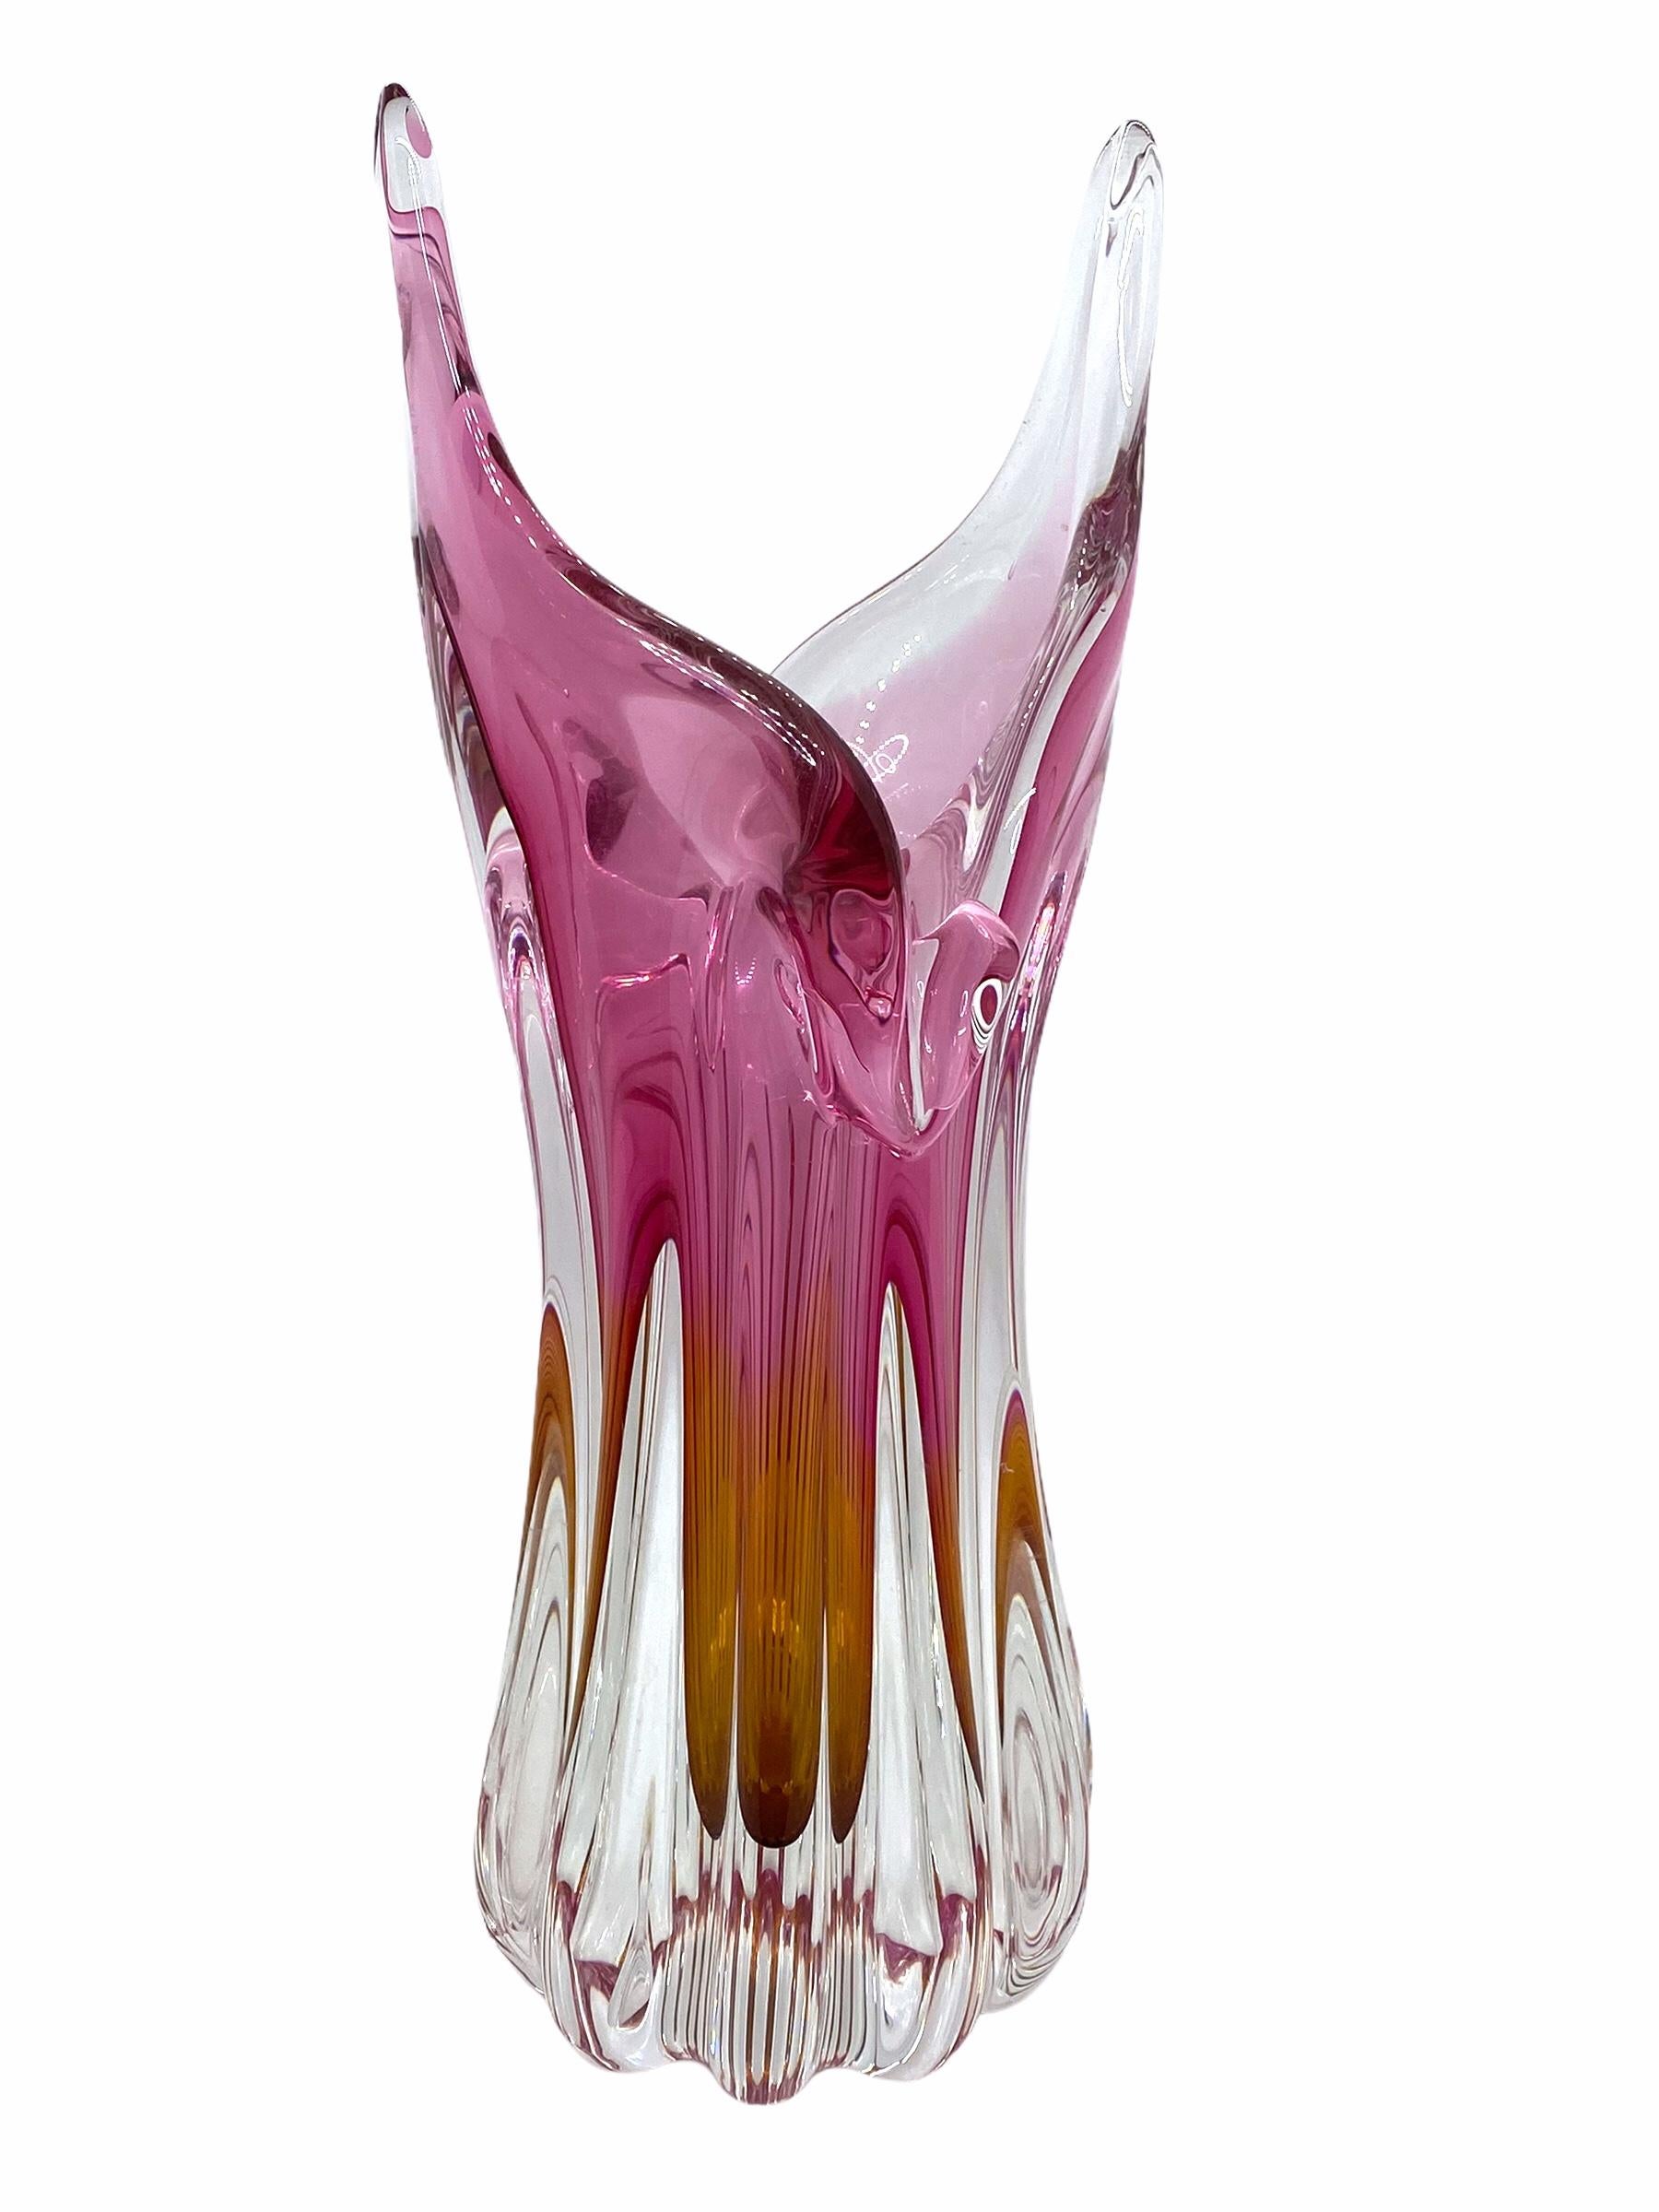 Mid-Century Modern Pink Amber and Clear Sommerso Art Glass Vase Murano, Italy, 1970s